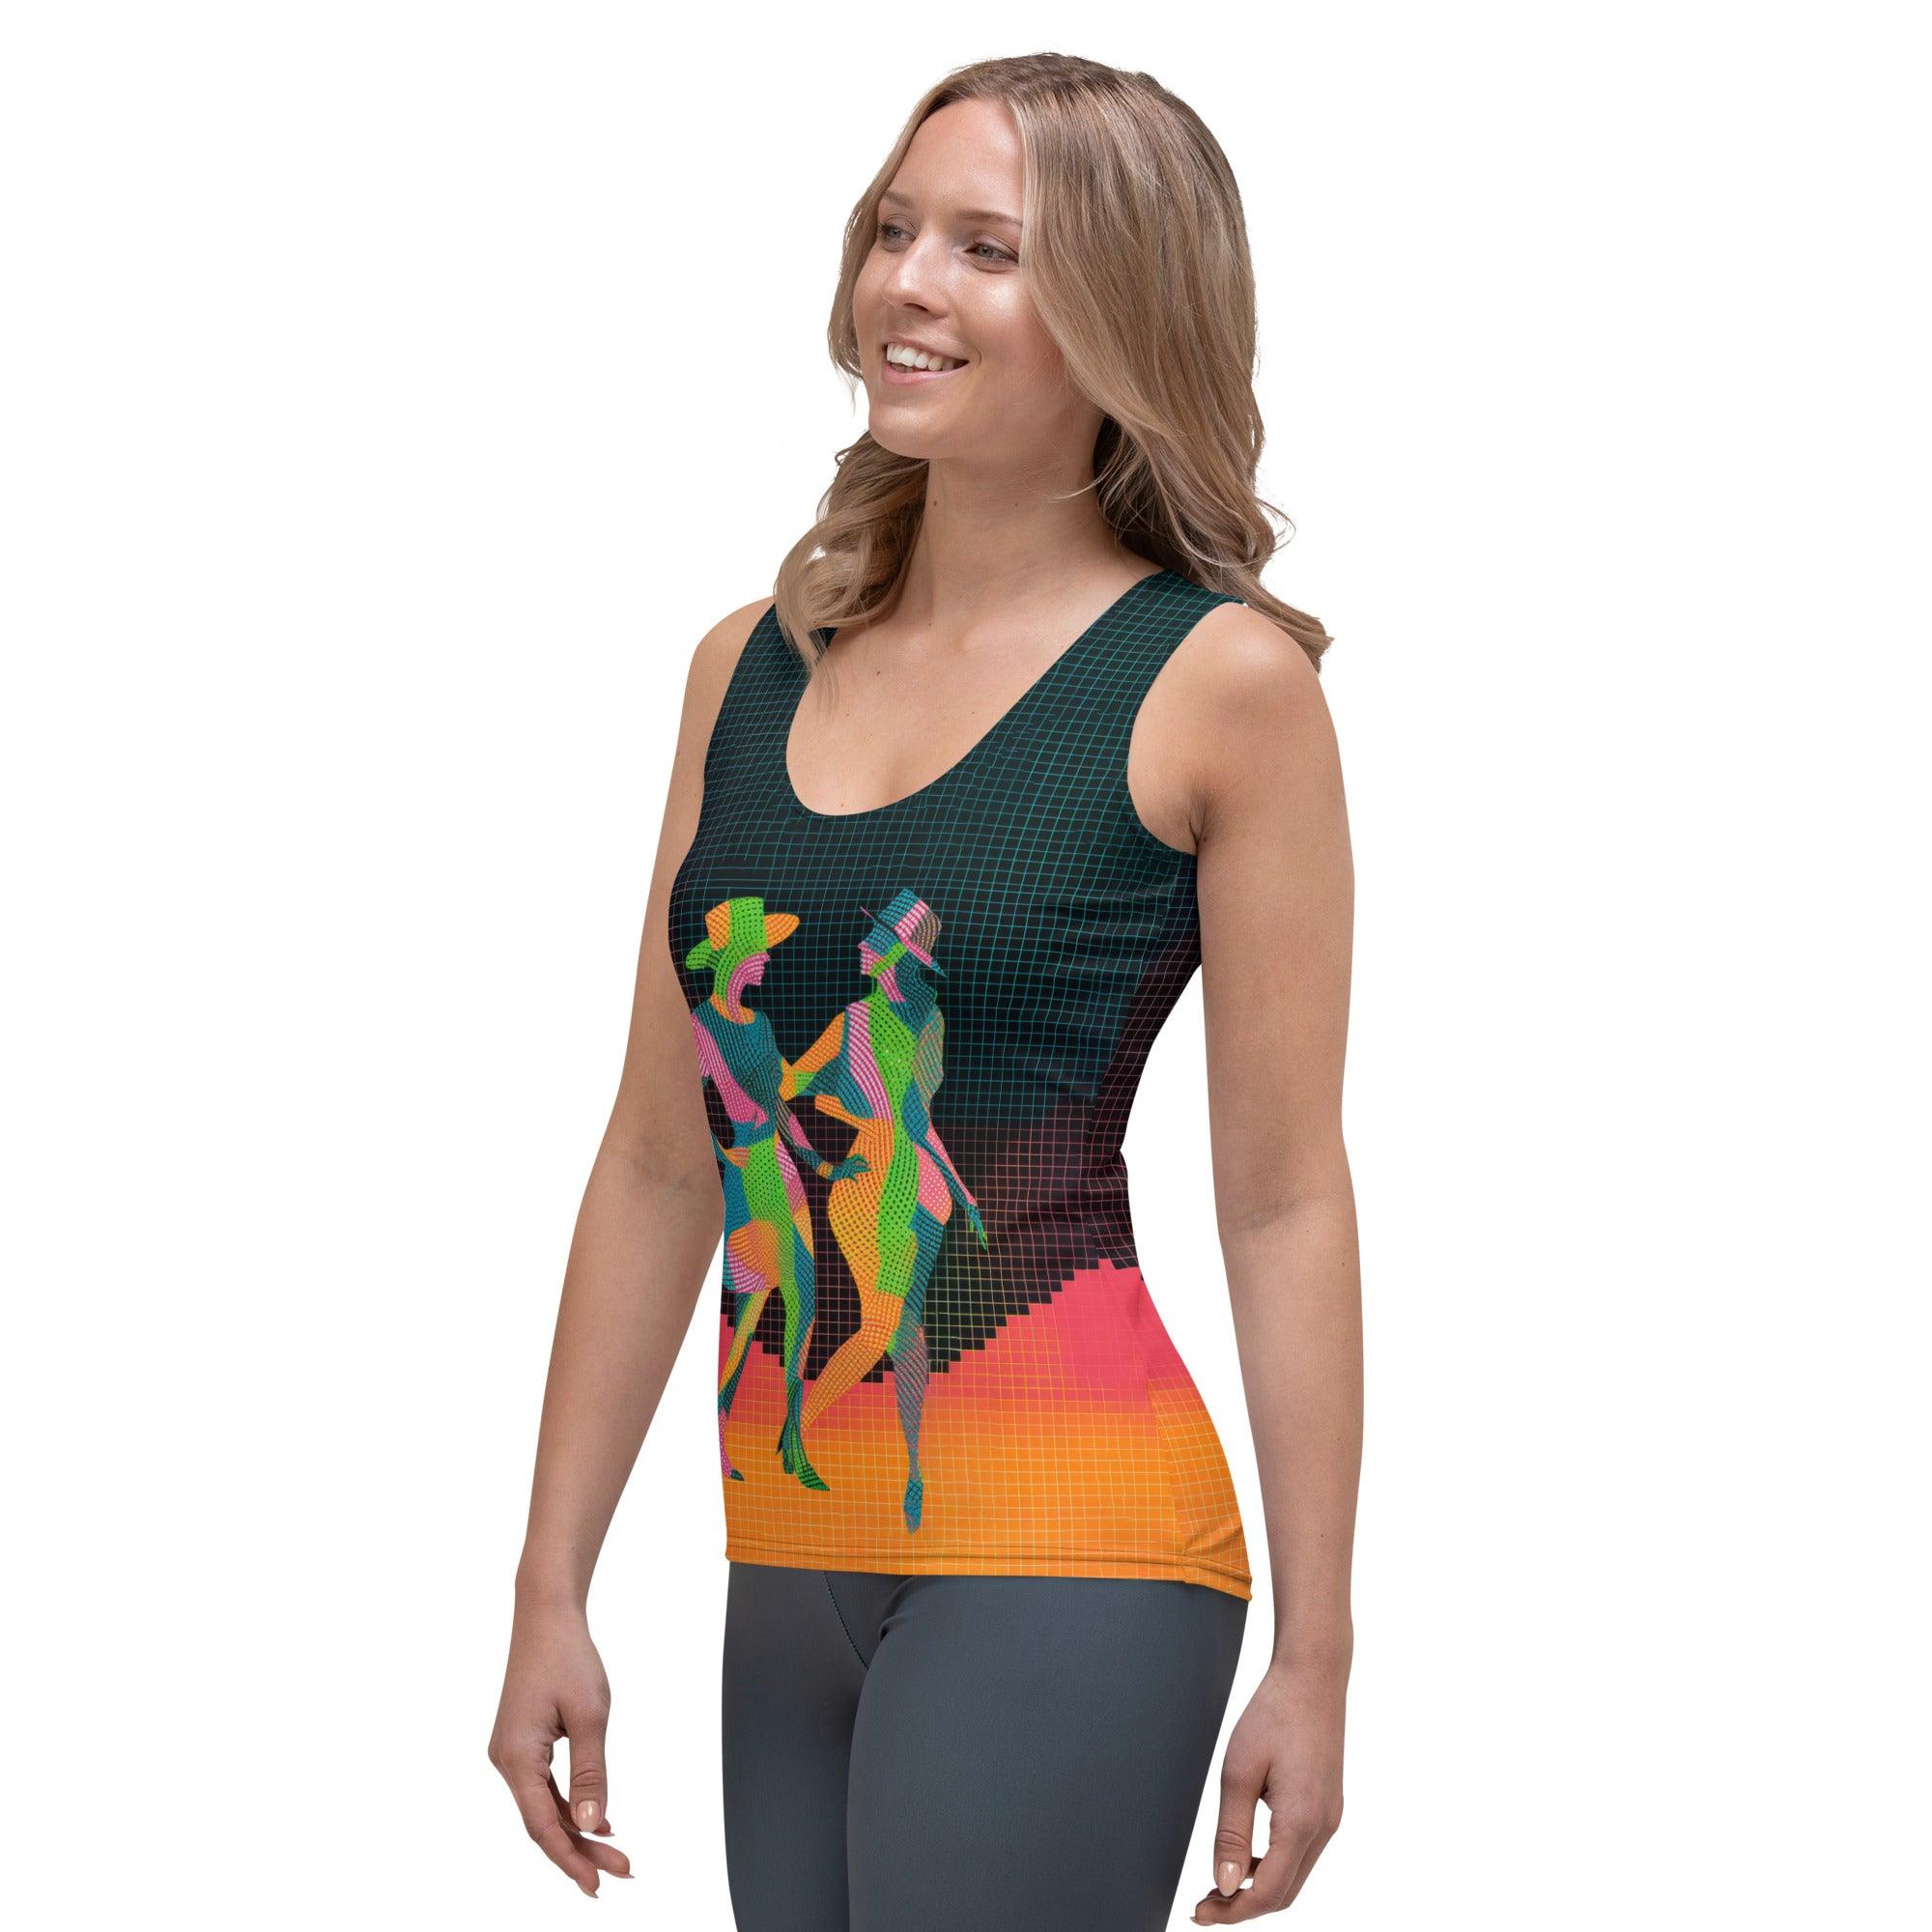 Elegant Balletic Intimacy Attire with Sublimation Print Detail